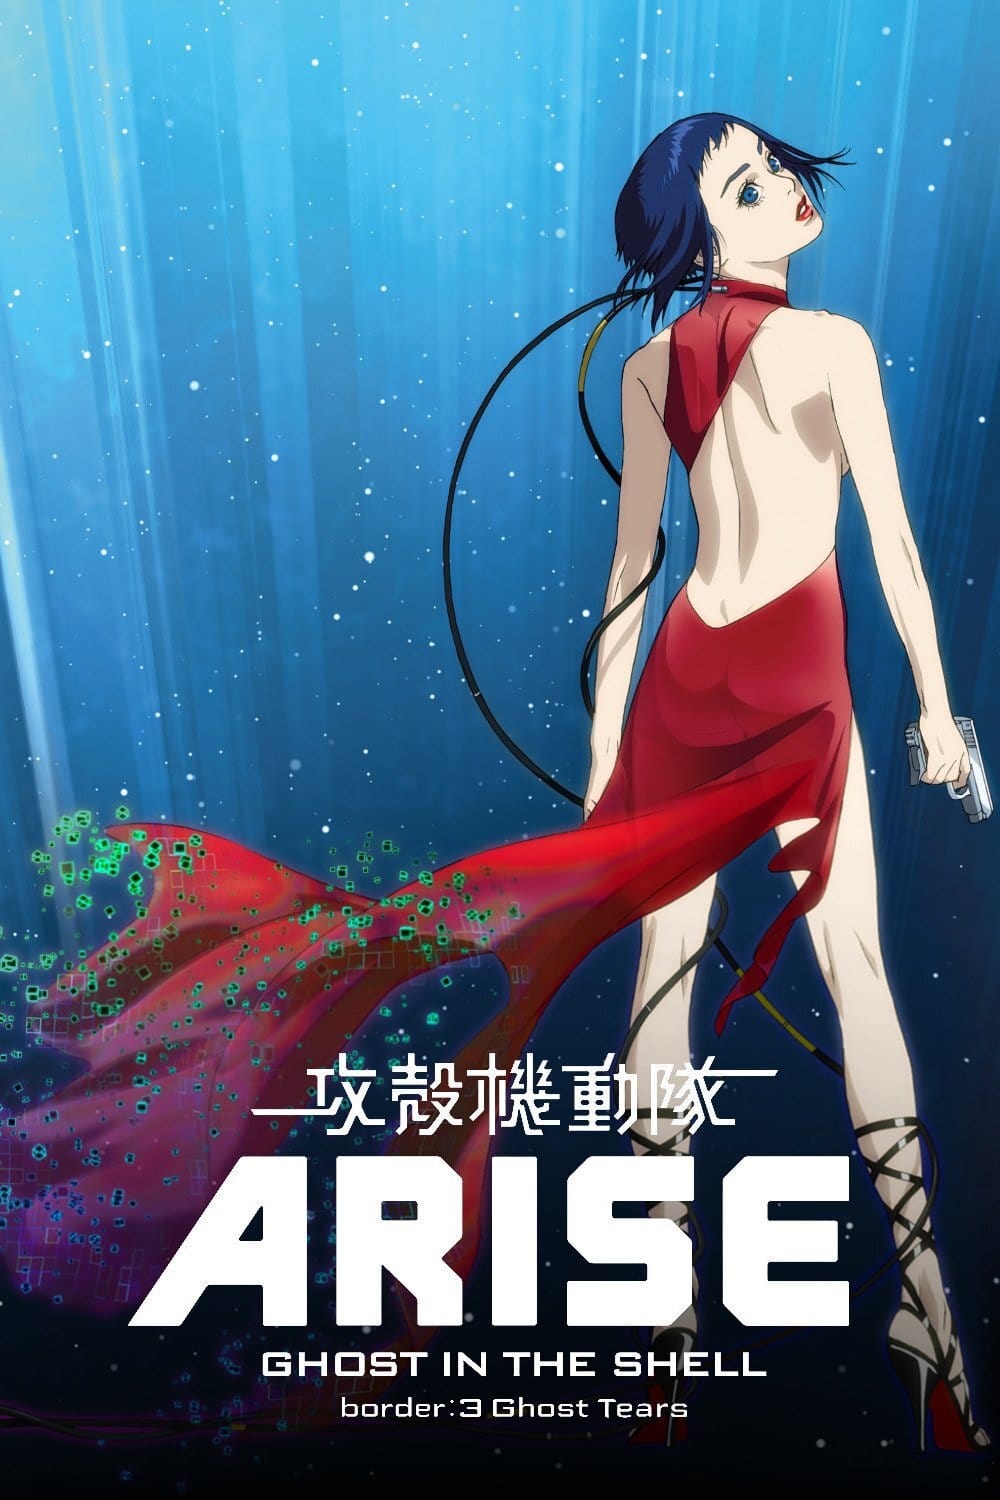 Ghost in the Shell Arise Border 3 Ghost Tears